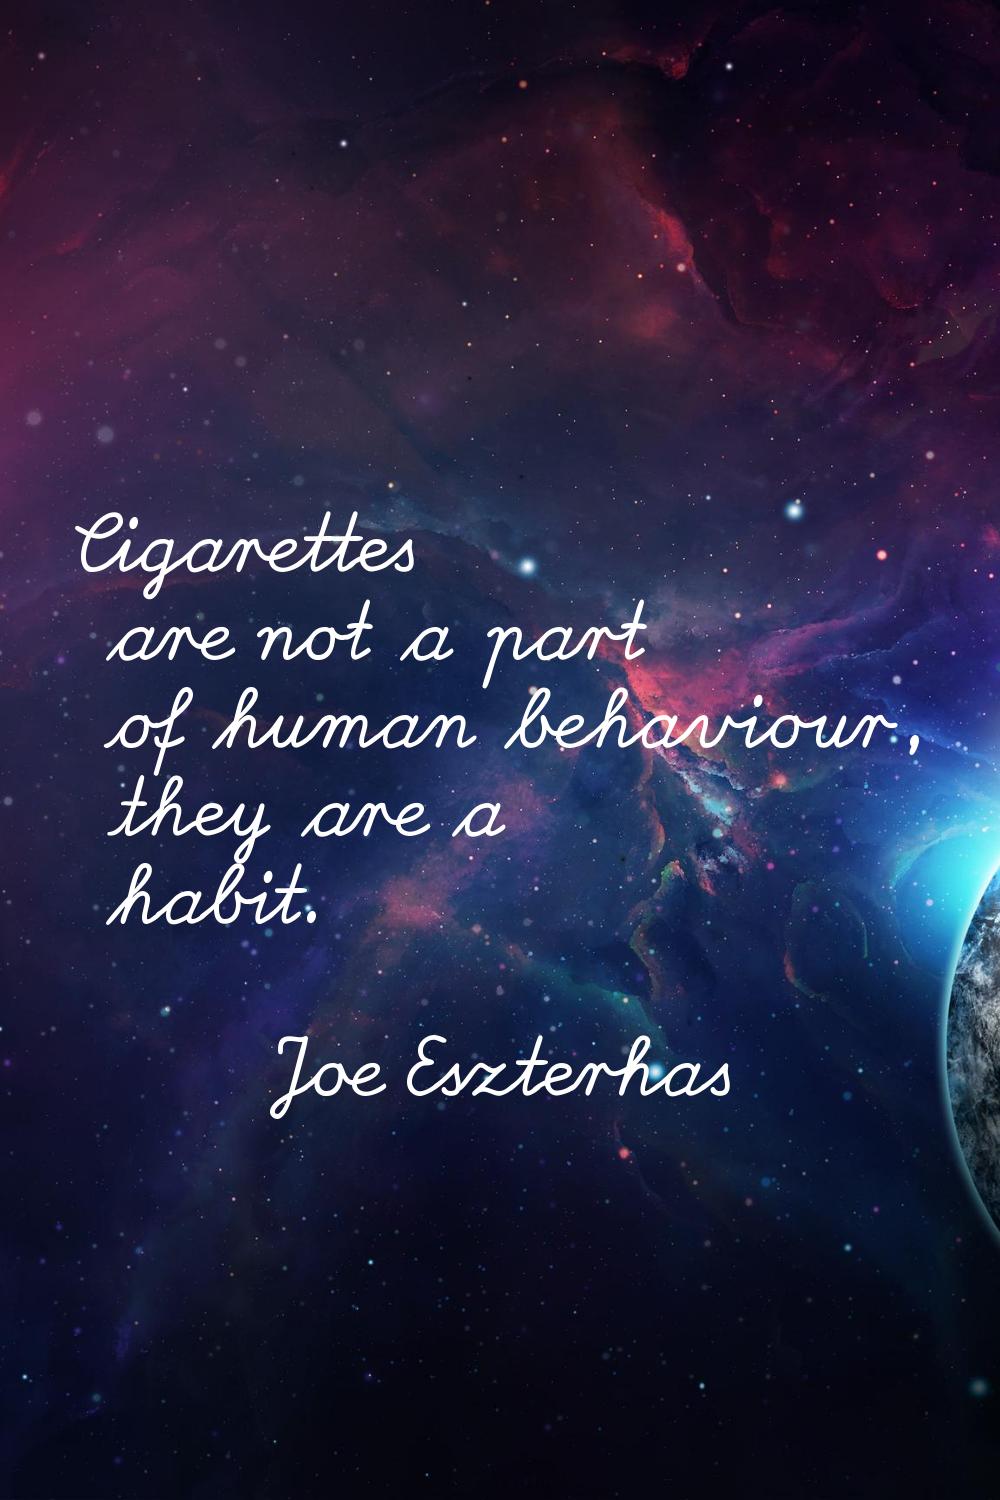 Cigarettes are not a part of human behaviour, they are a habit.